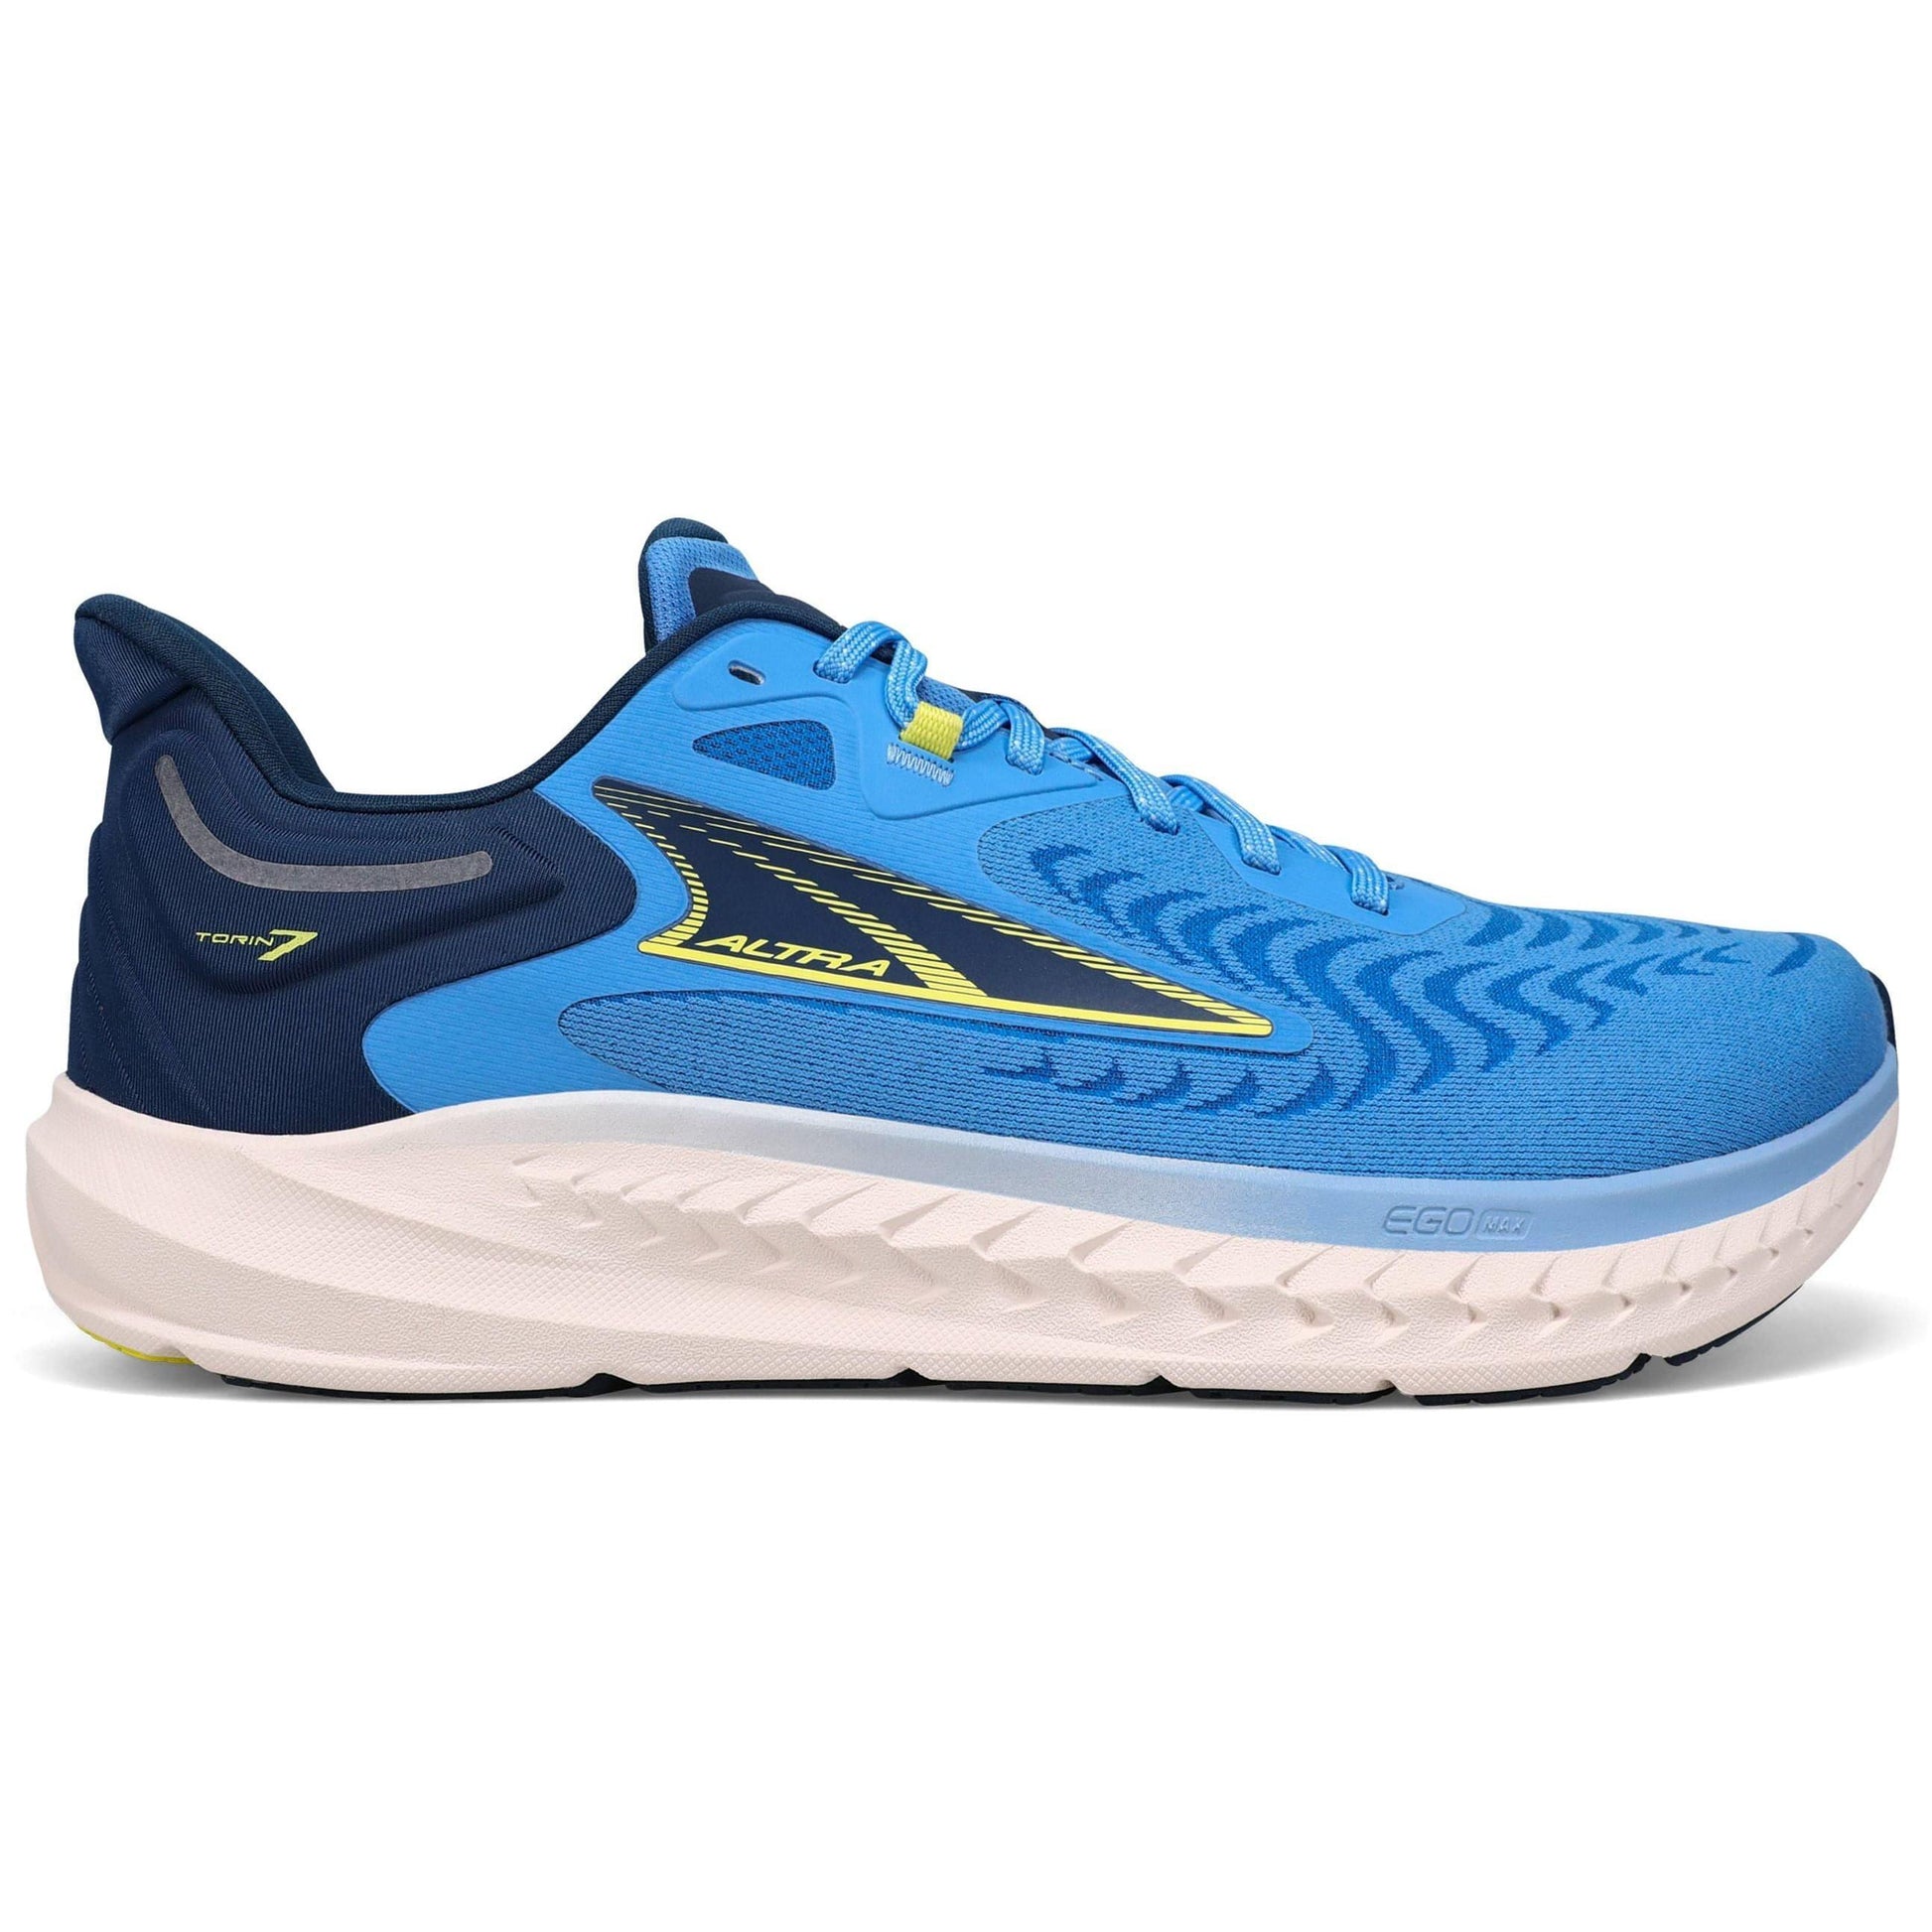 Altra men's blue Torin 4.5 Plush road running shoe with white sole and FootShape toe box